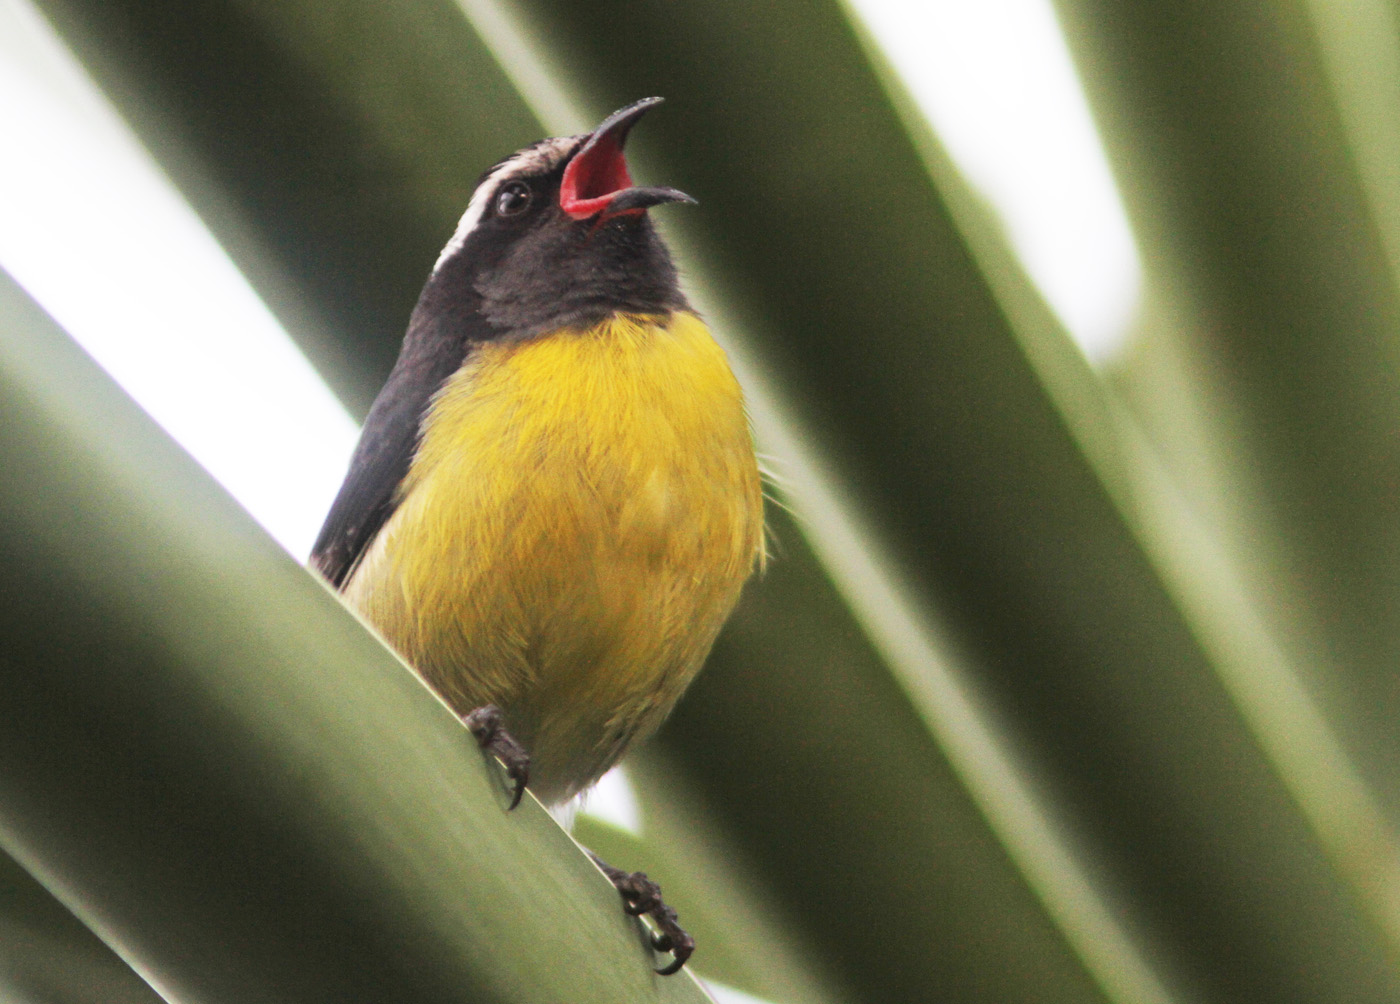 Bananaquit on the branch